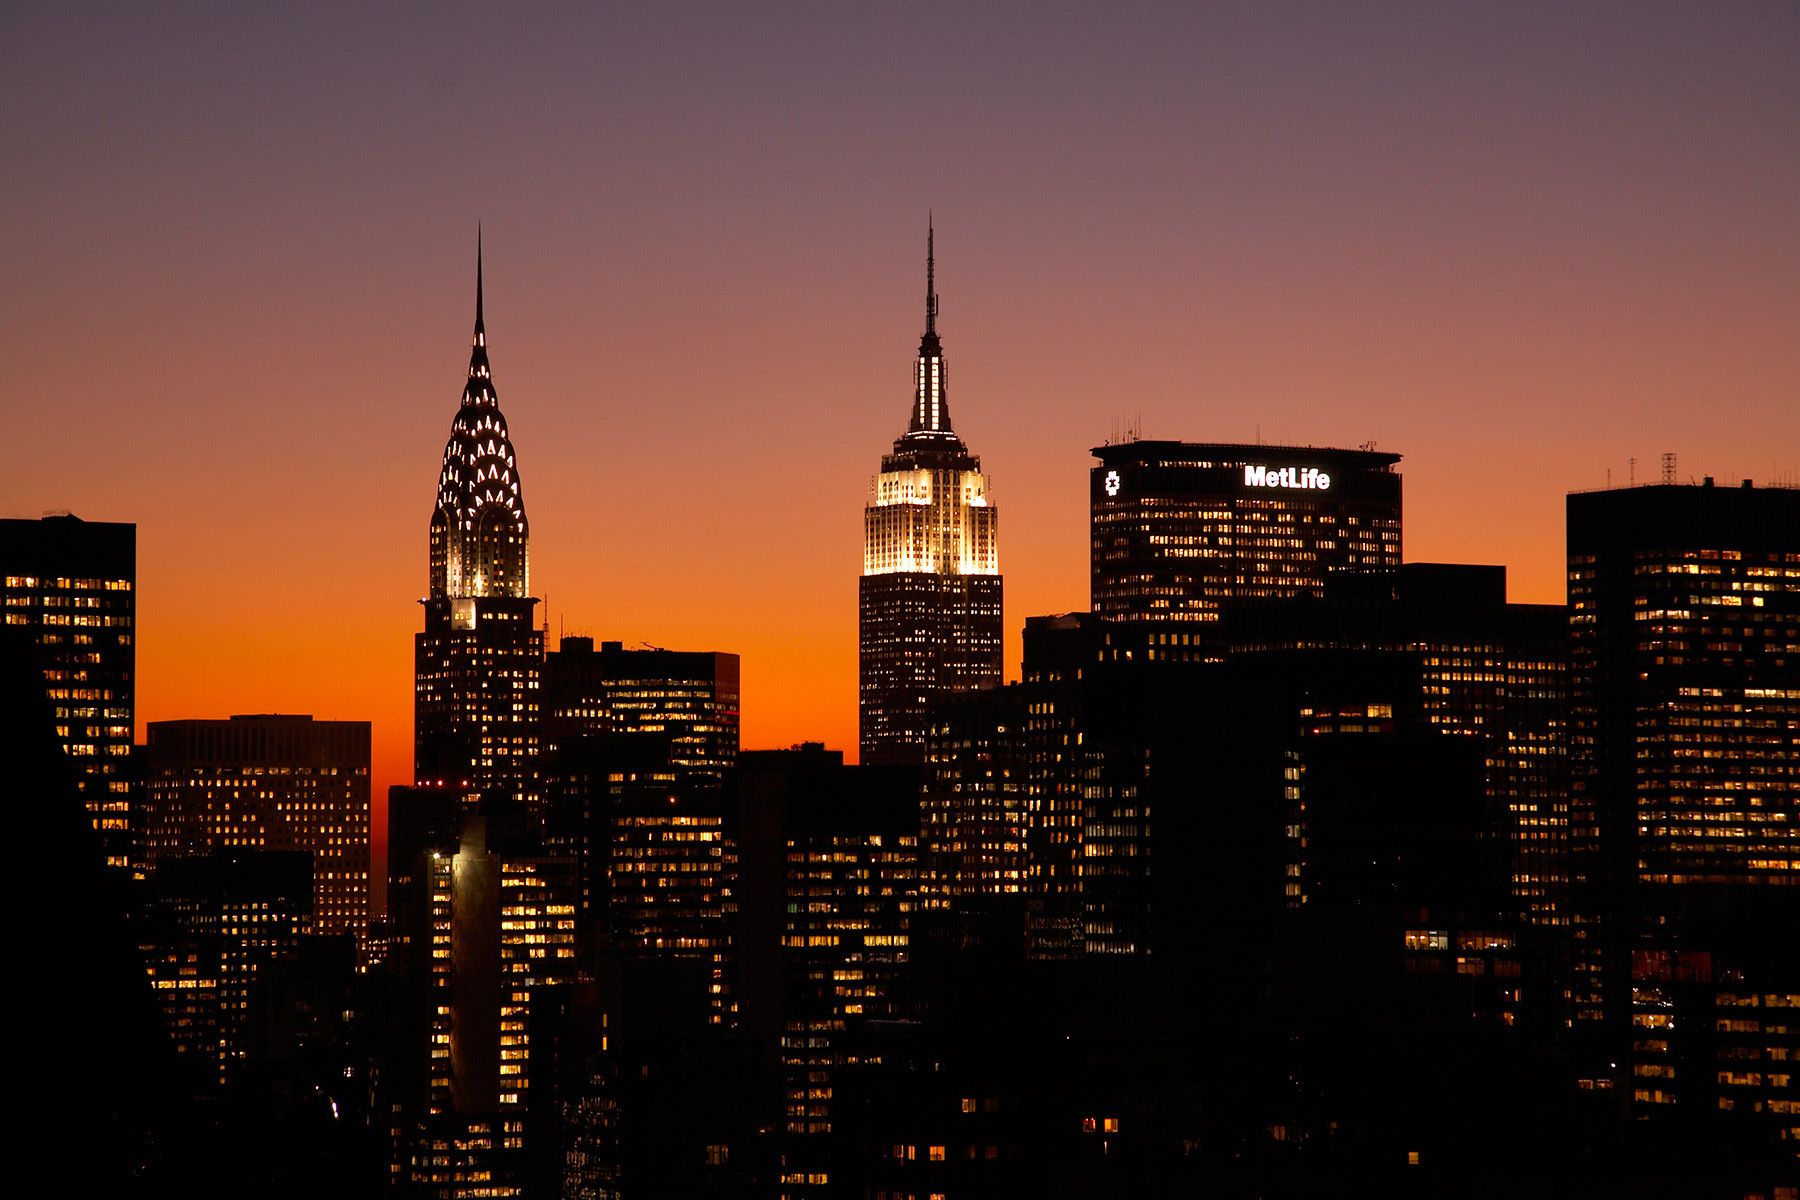 The Chrysler Building and Empire State Building